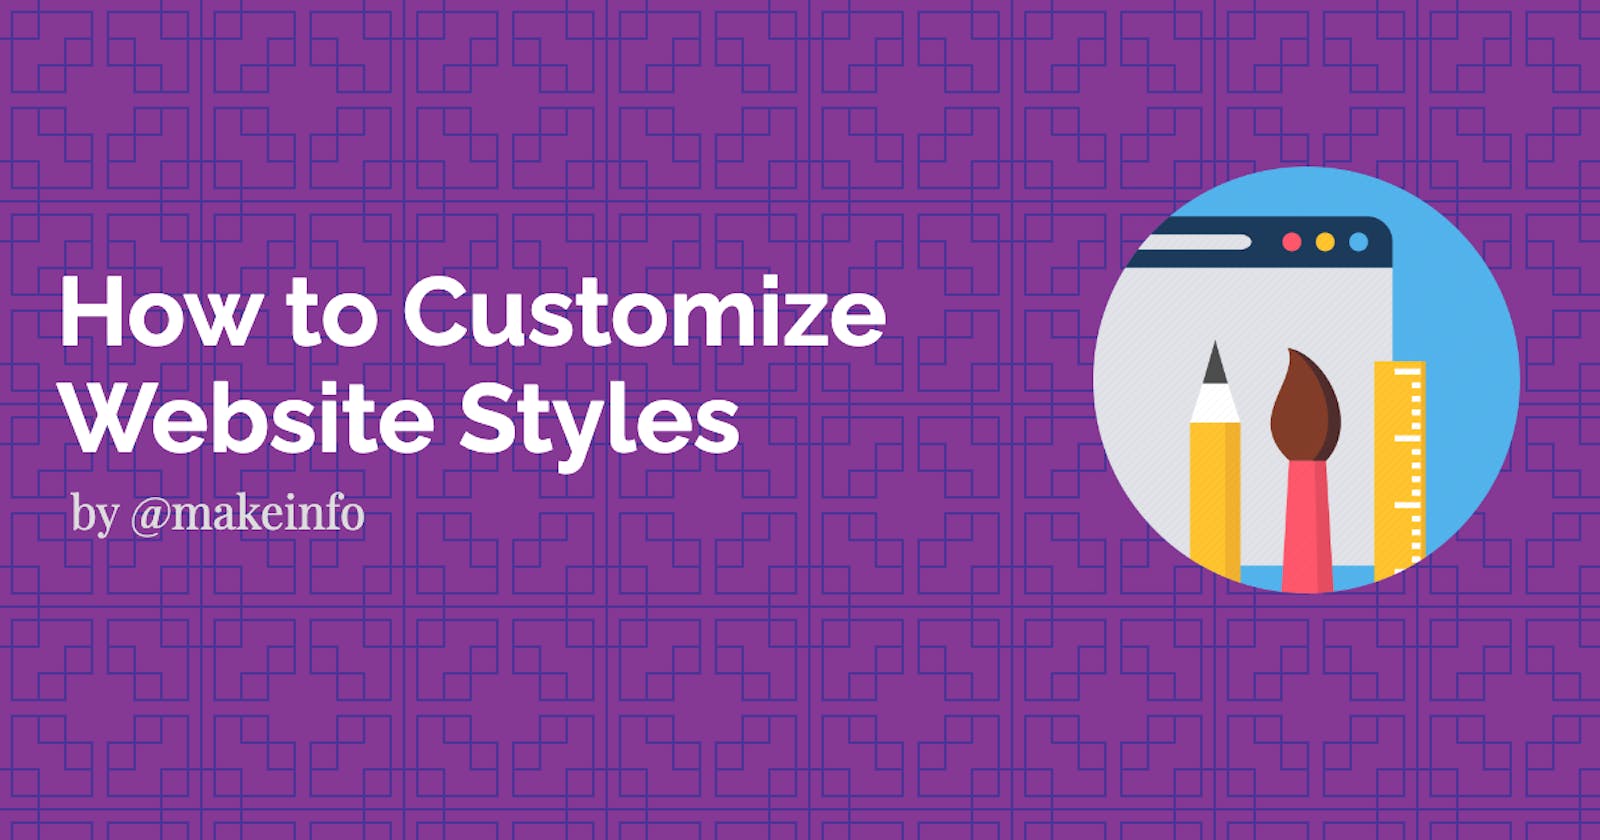 How to Customize Website Styles